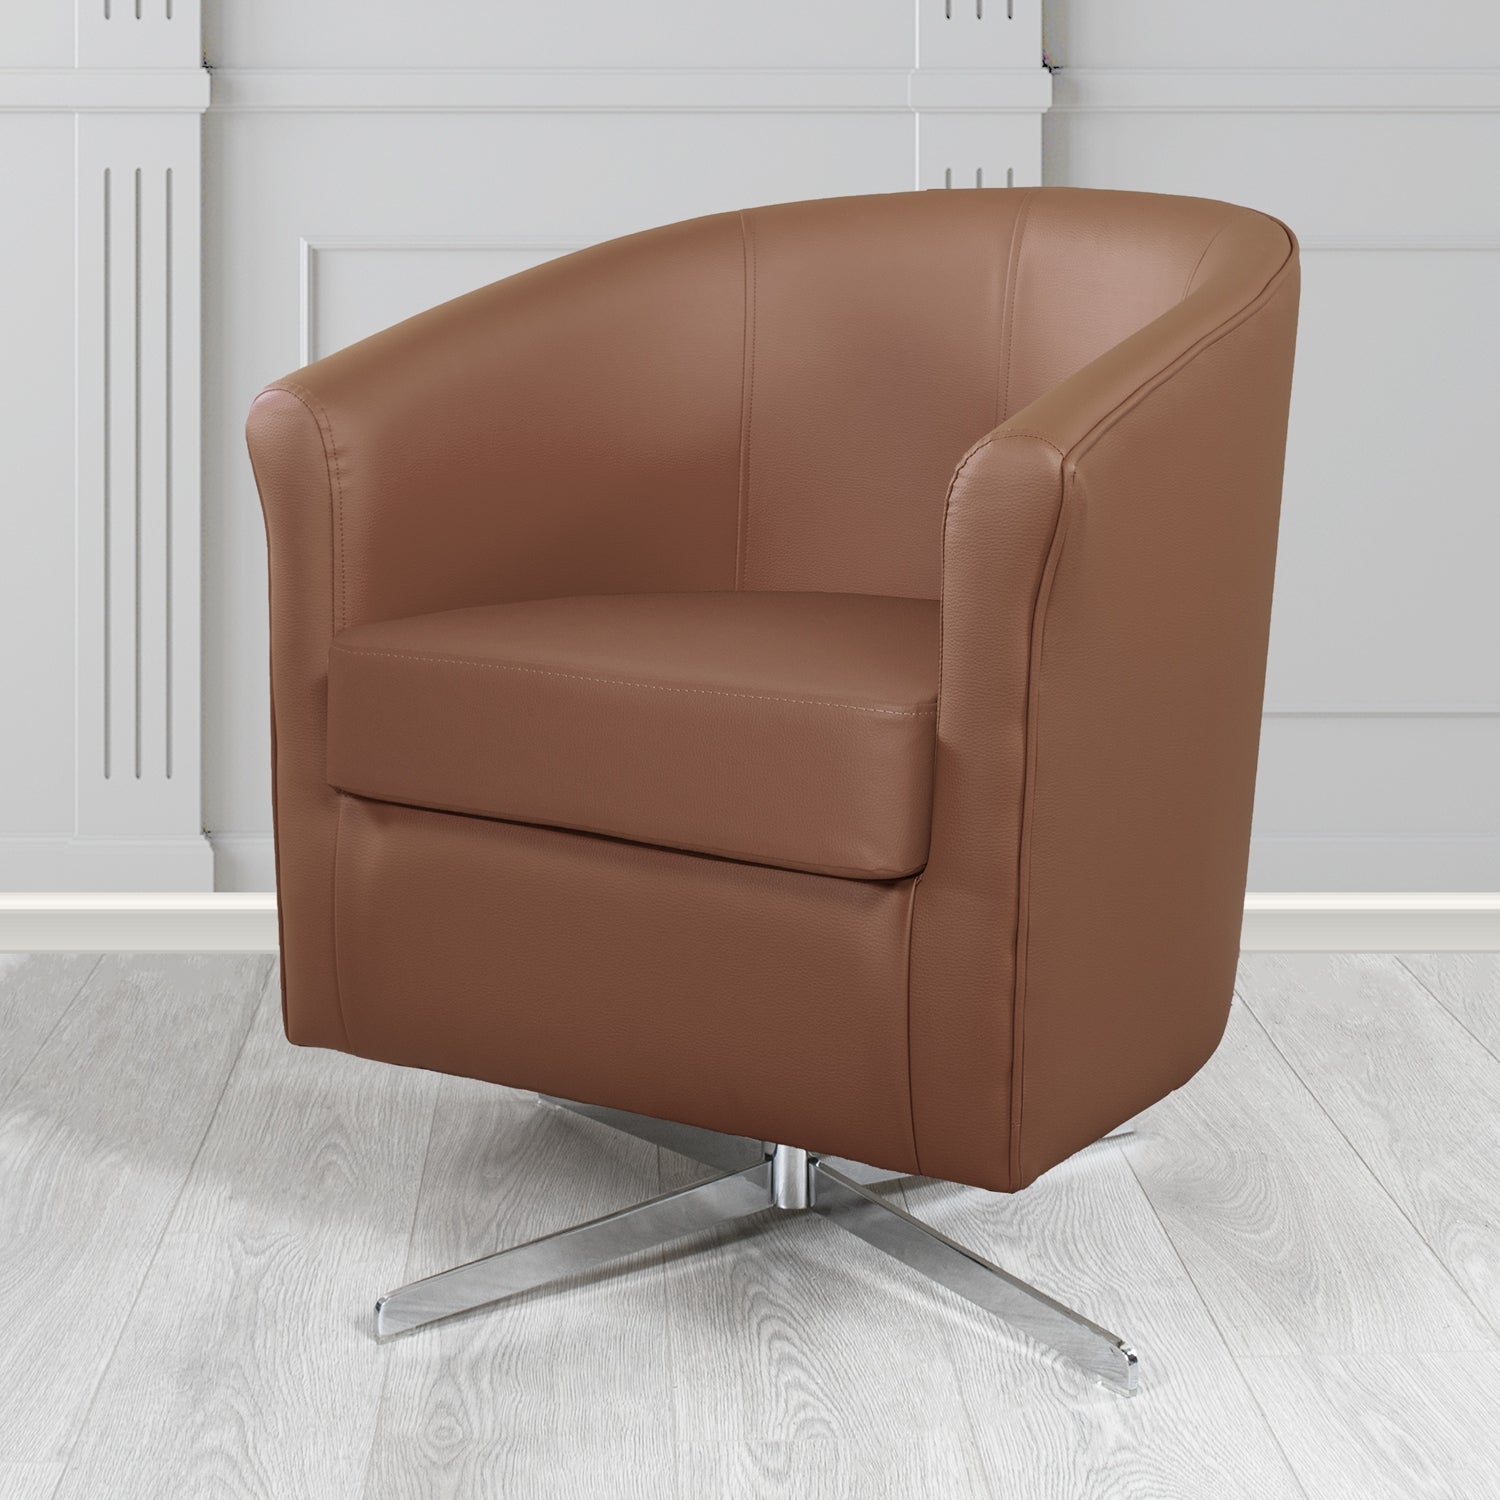 Cannes Swivel Tub Chair in Just Colour Walnut Crib 5 Faux Leather - The Tub Chair Shop